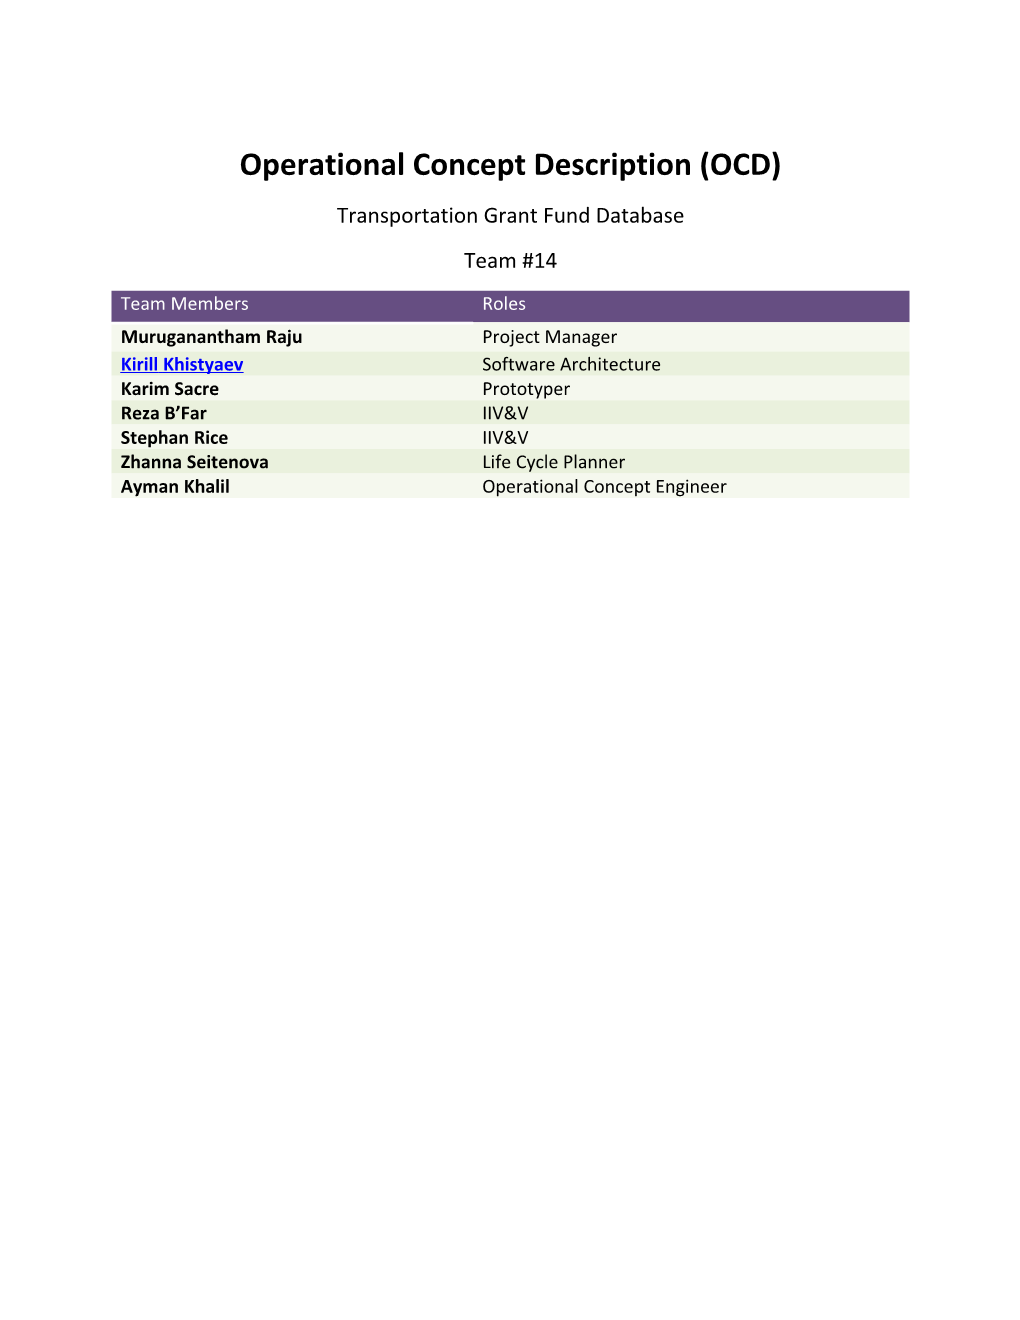 Operational Concept Description (OCD) for Ndiversion 3.0